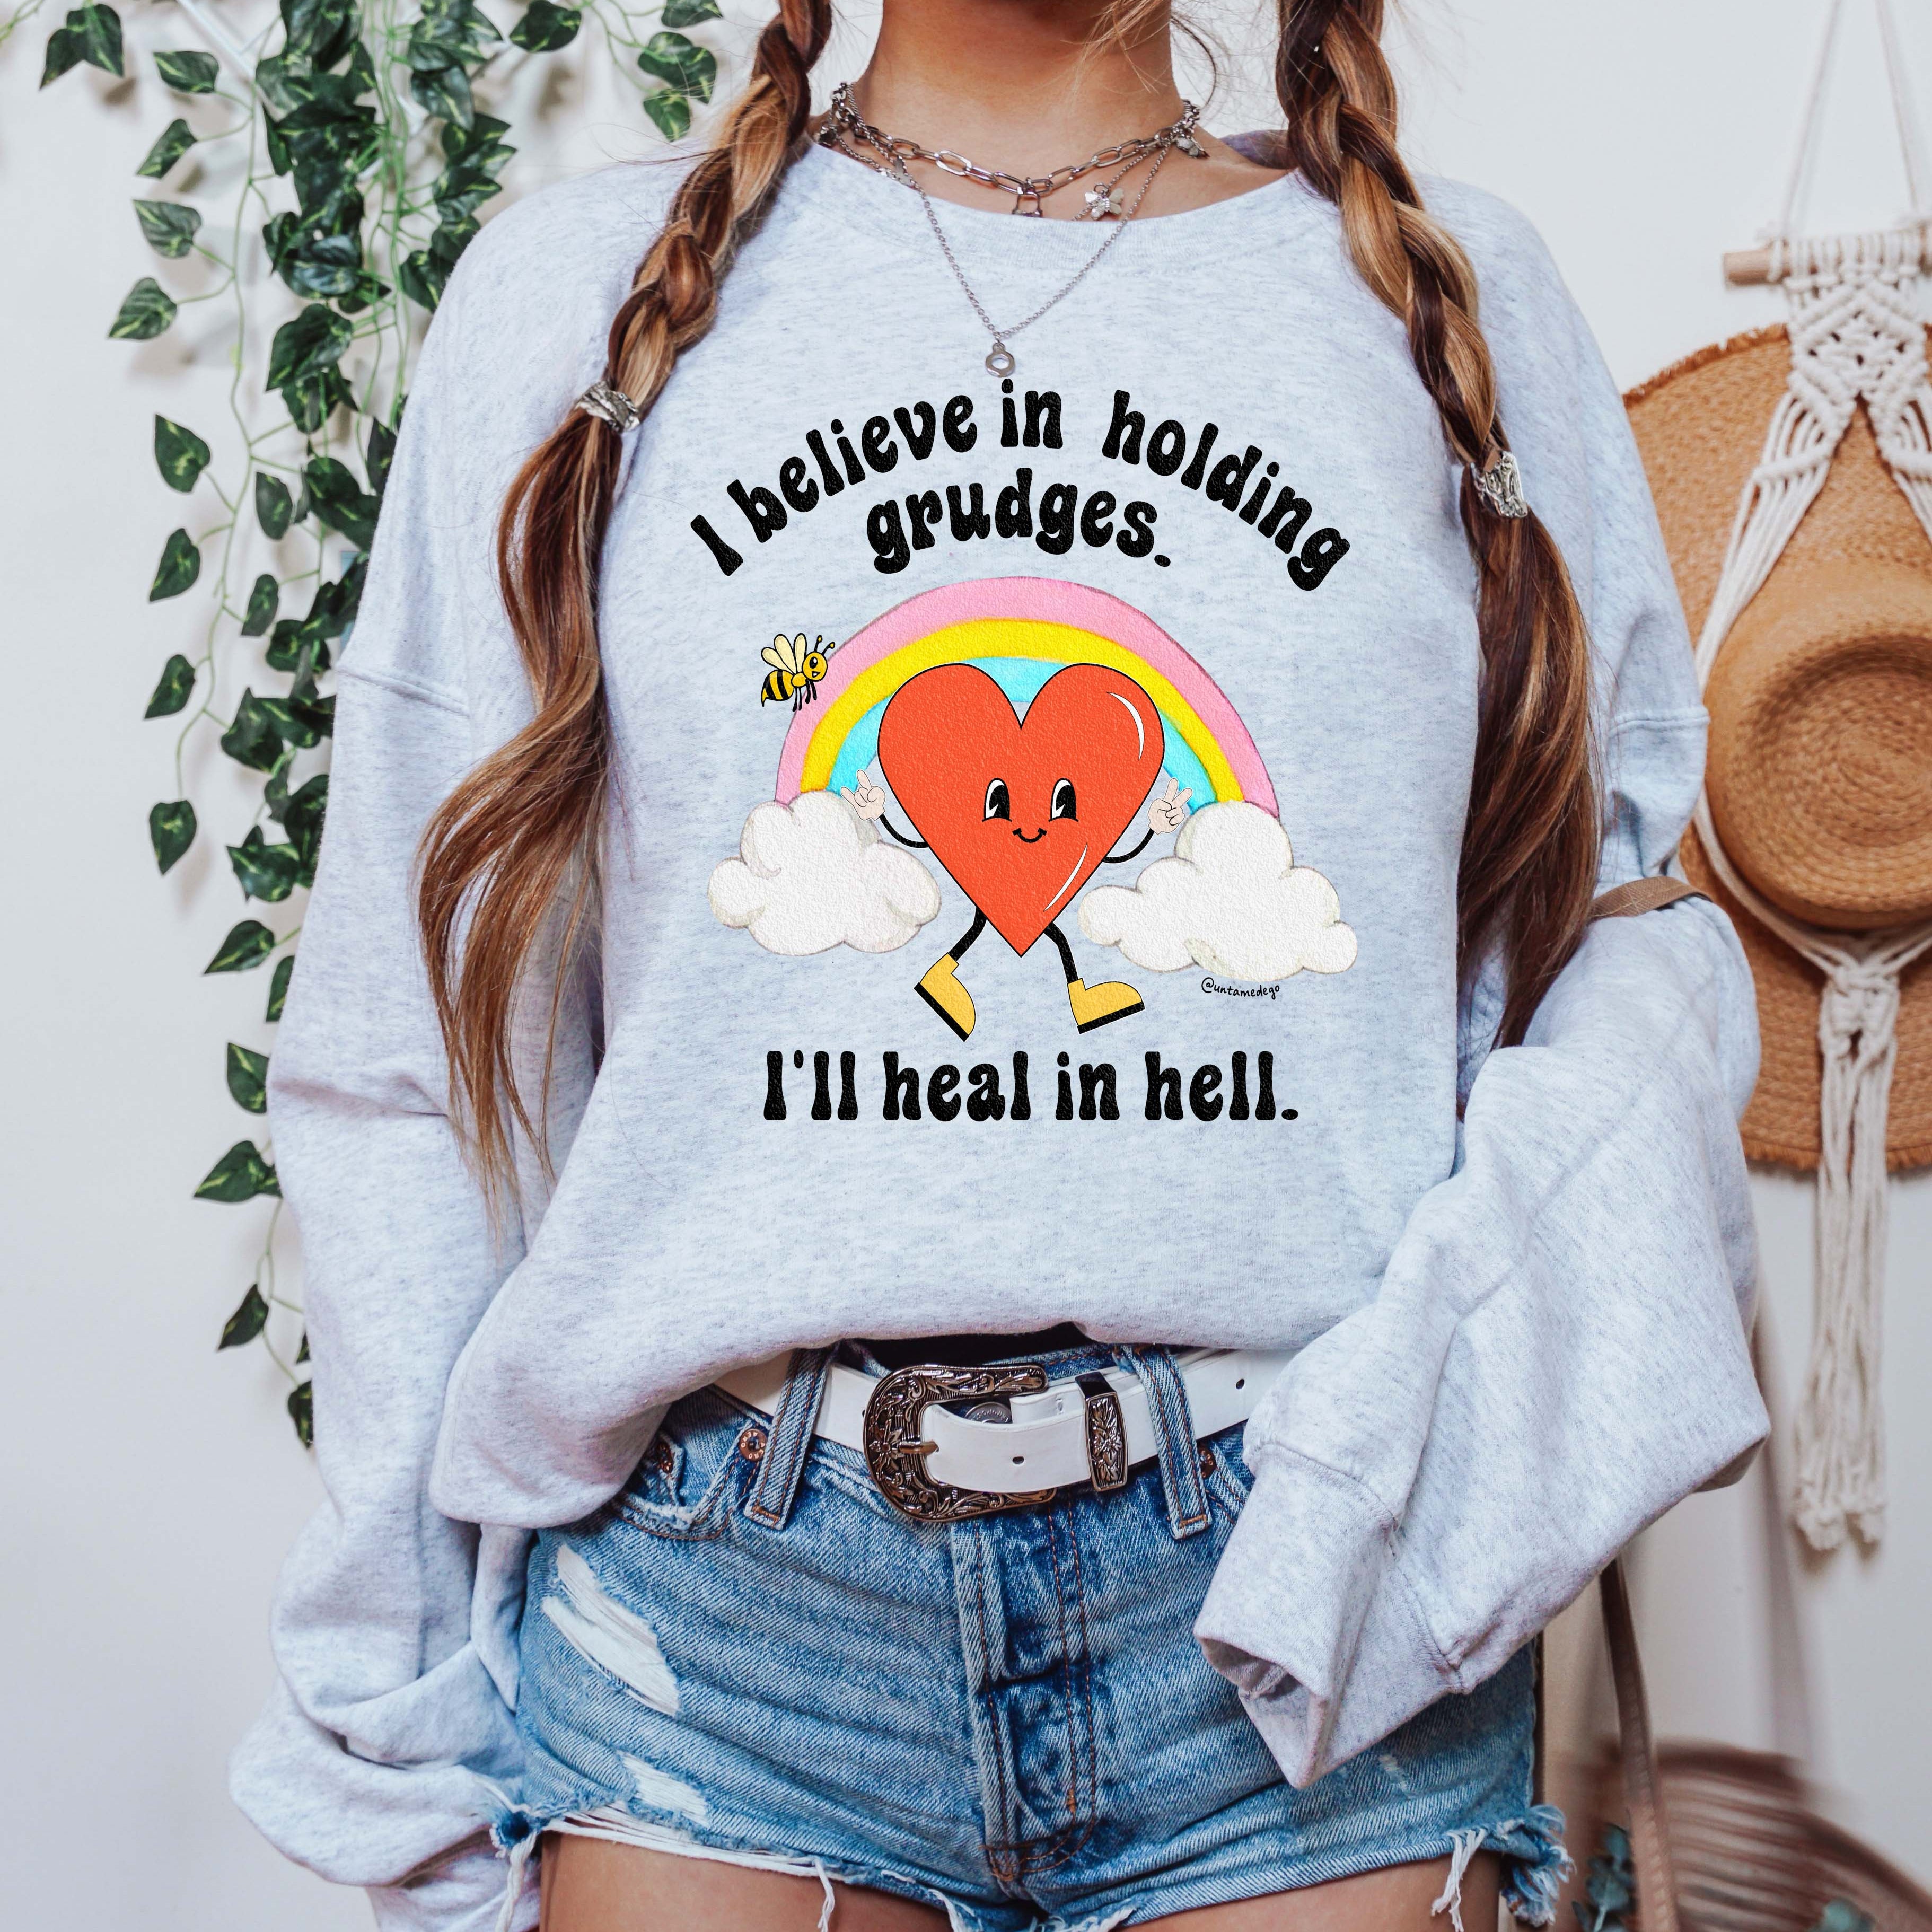 I Believe In Holding Grudges I'll Heal In Hell Crew Sweatshirt